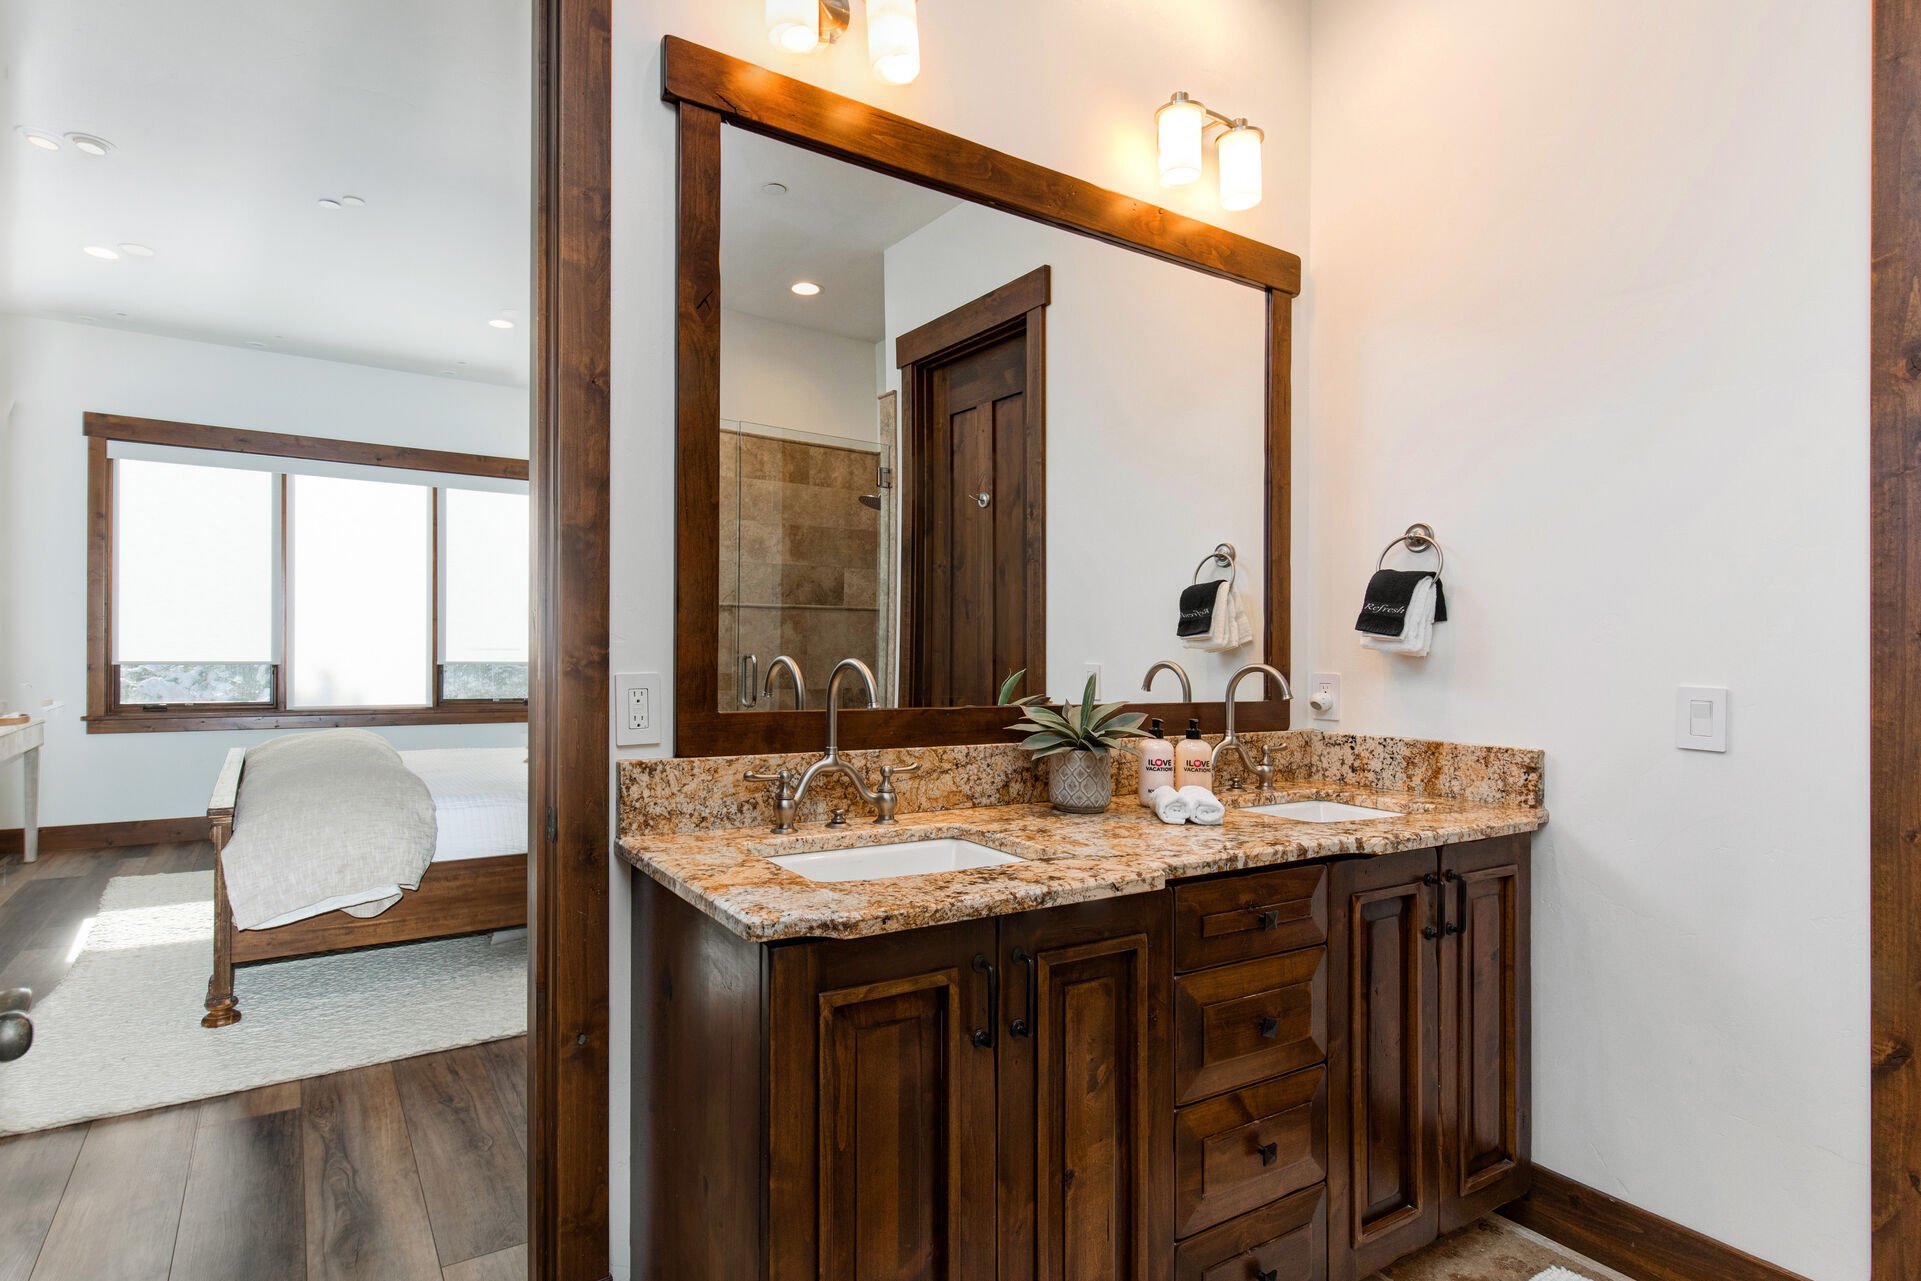 The grand master bath offers dual stone counters sinks, a large tile and glass shower, and jetted soaking tub